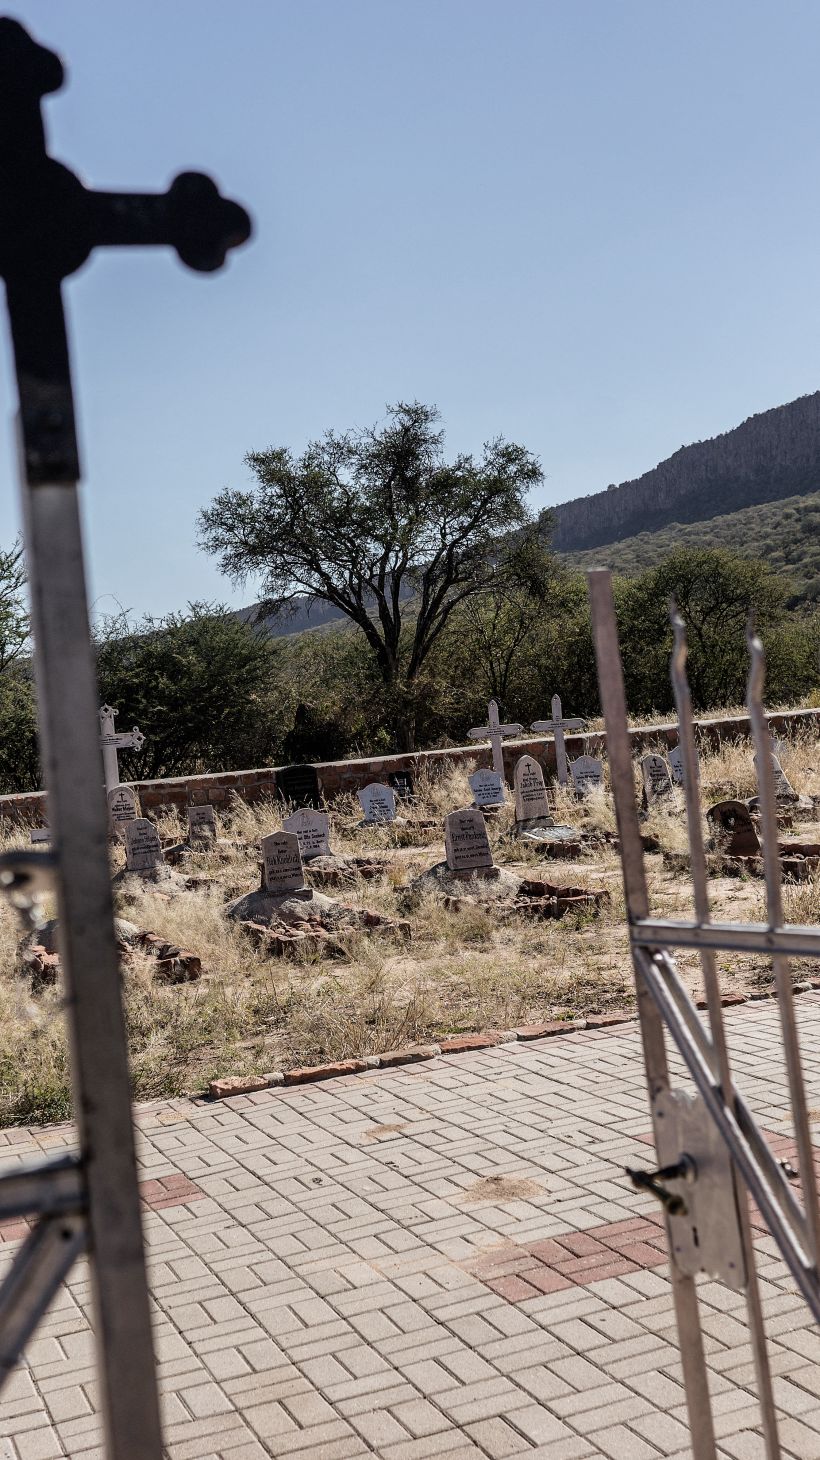 A graveyard in Namibia